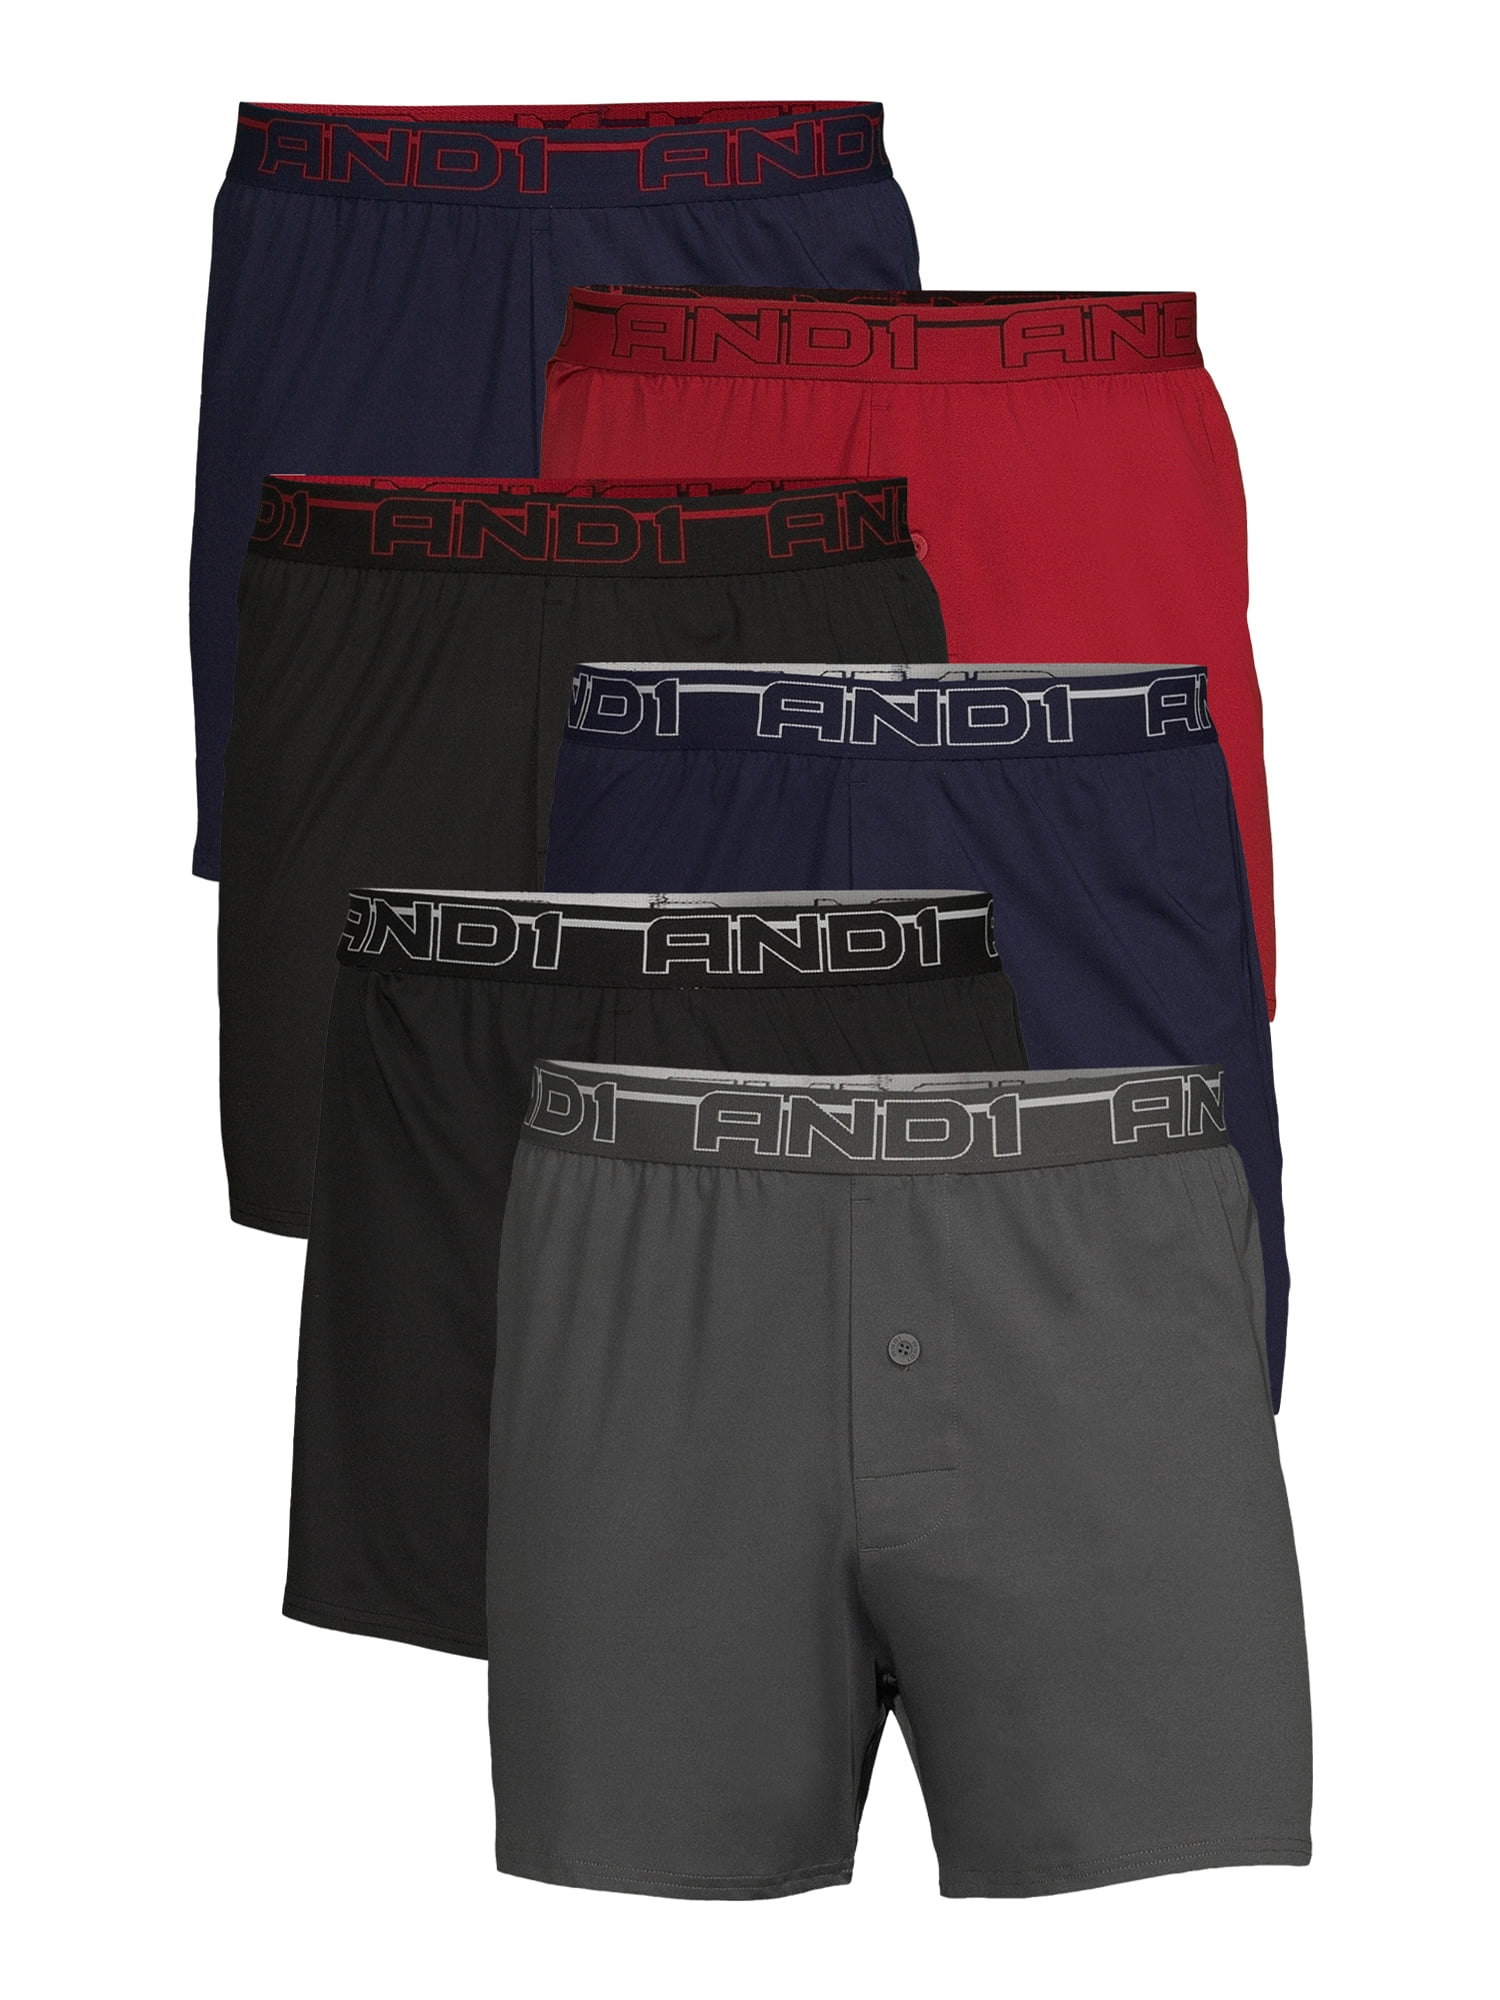 AND 1 Men's Knit Boxers, 6-Pack, Sizes S-3XL - Walmart.com